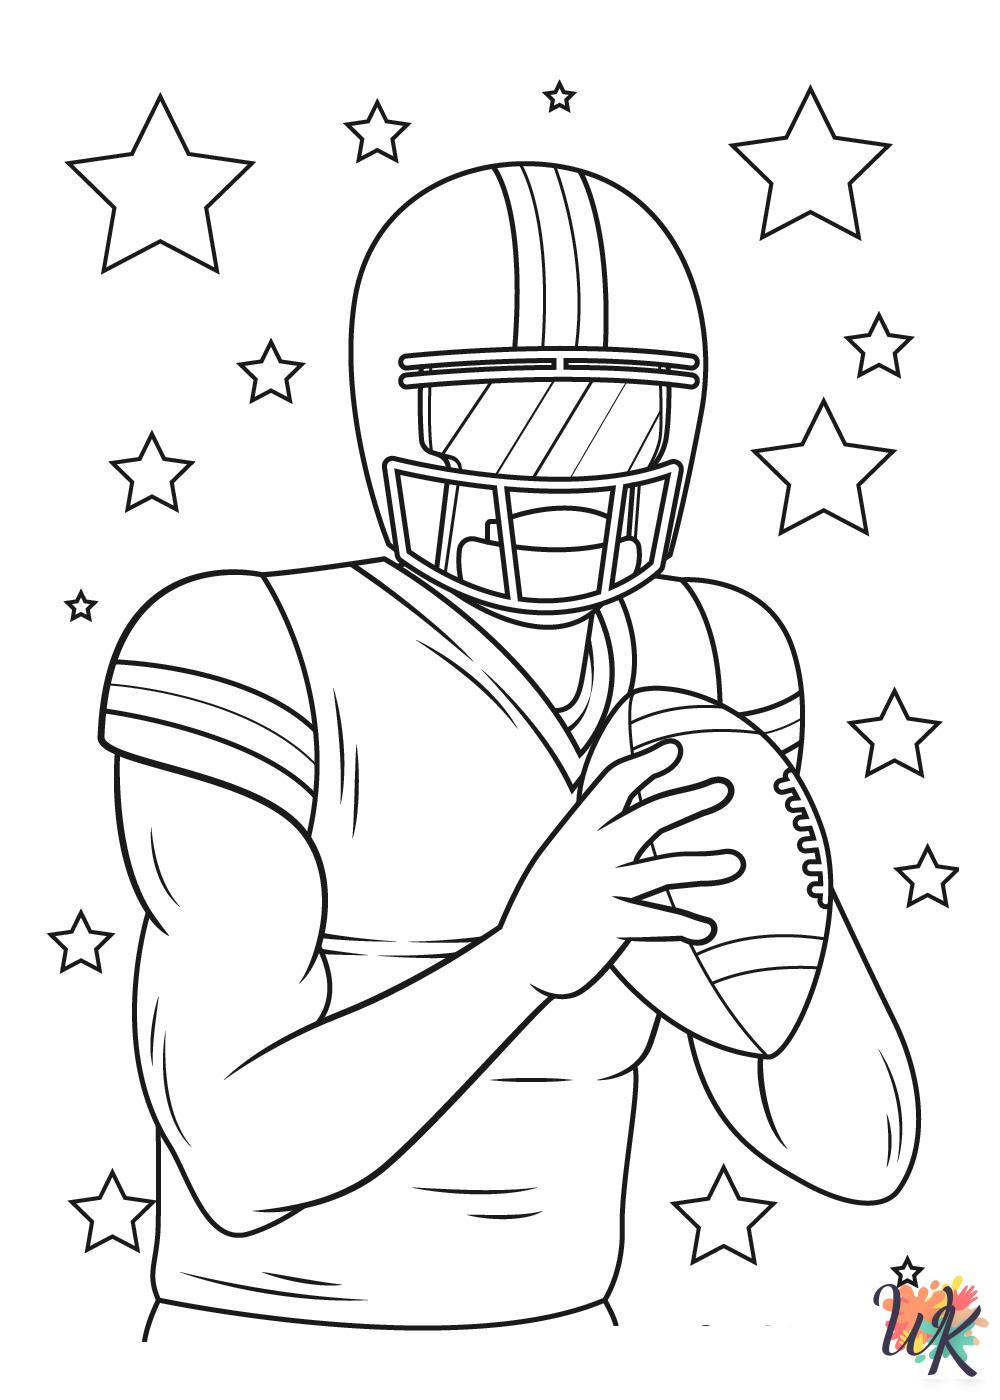 printable NFL coloring pages for adults